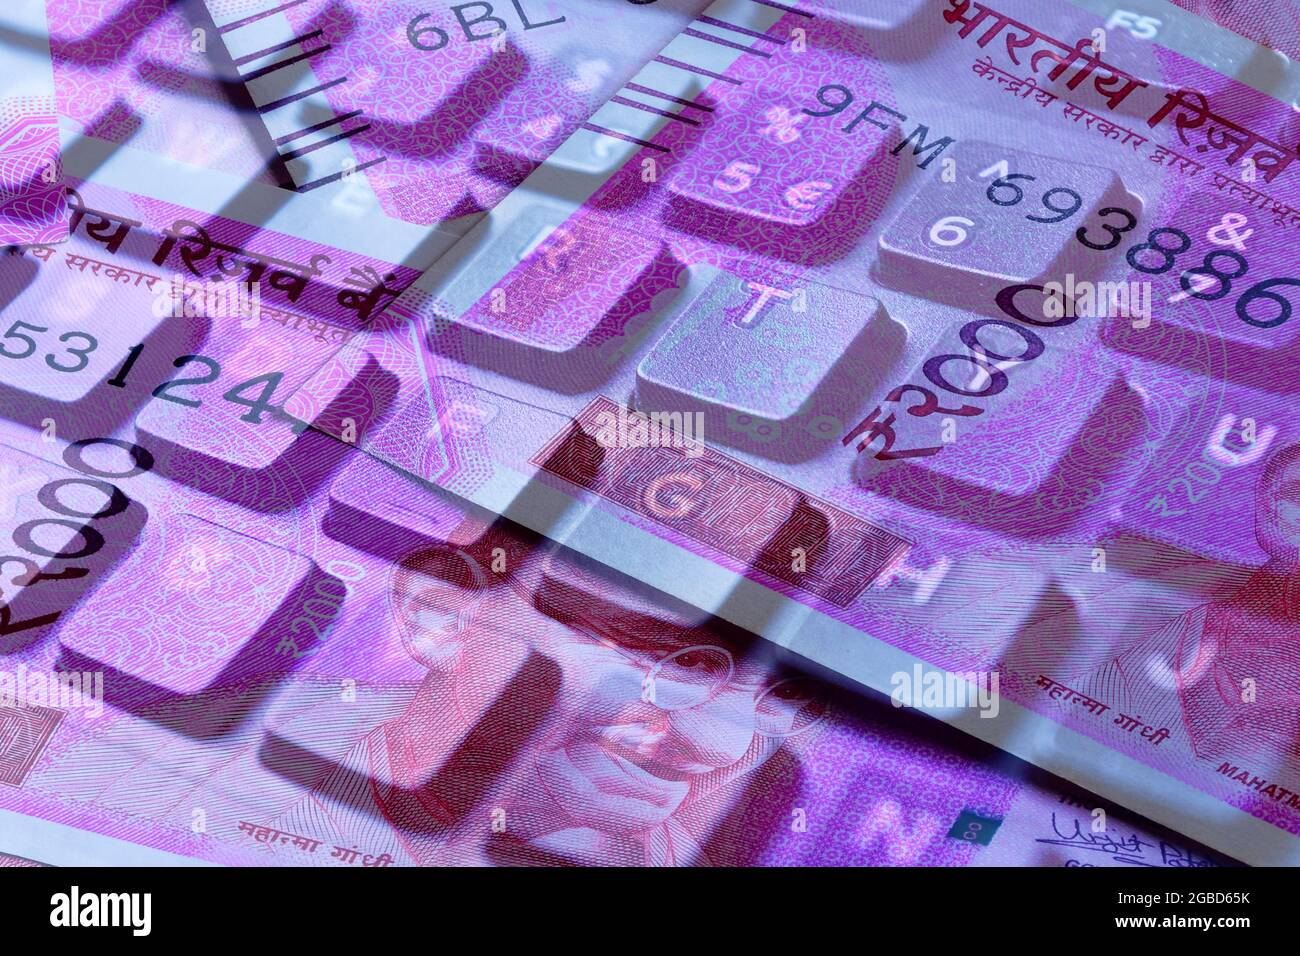 Indian currency merge with keyboard, Digital India concept Stock Photo